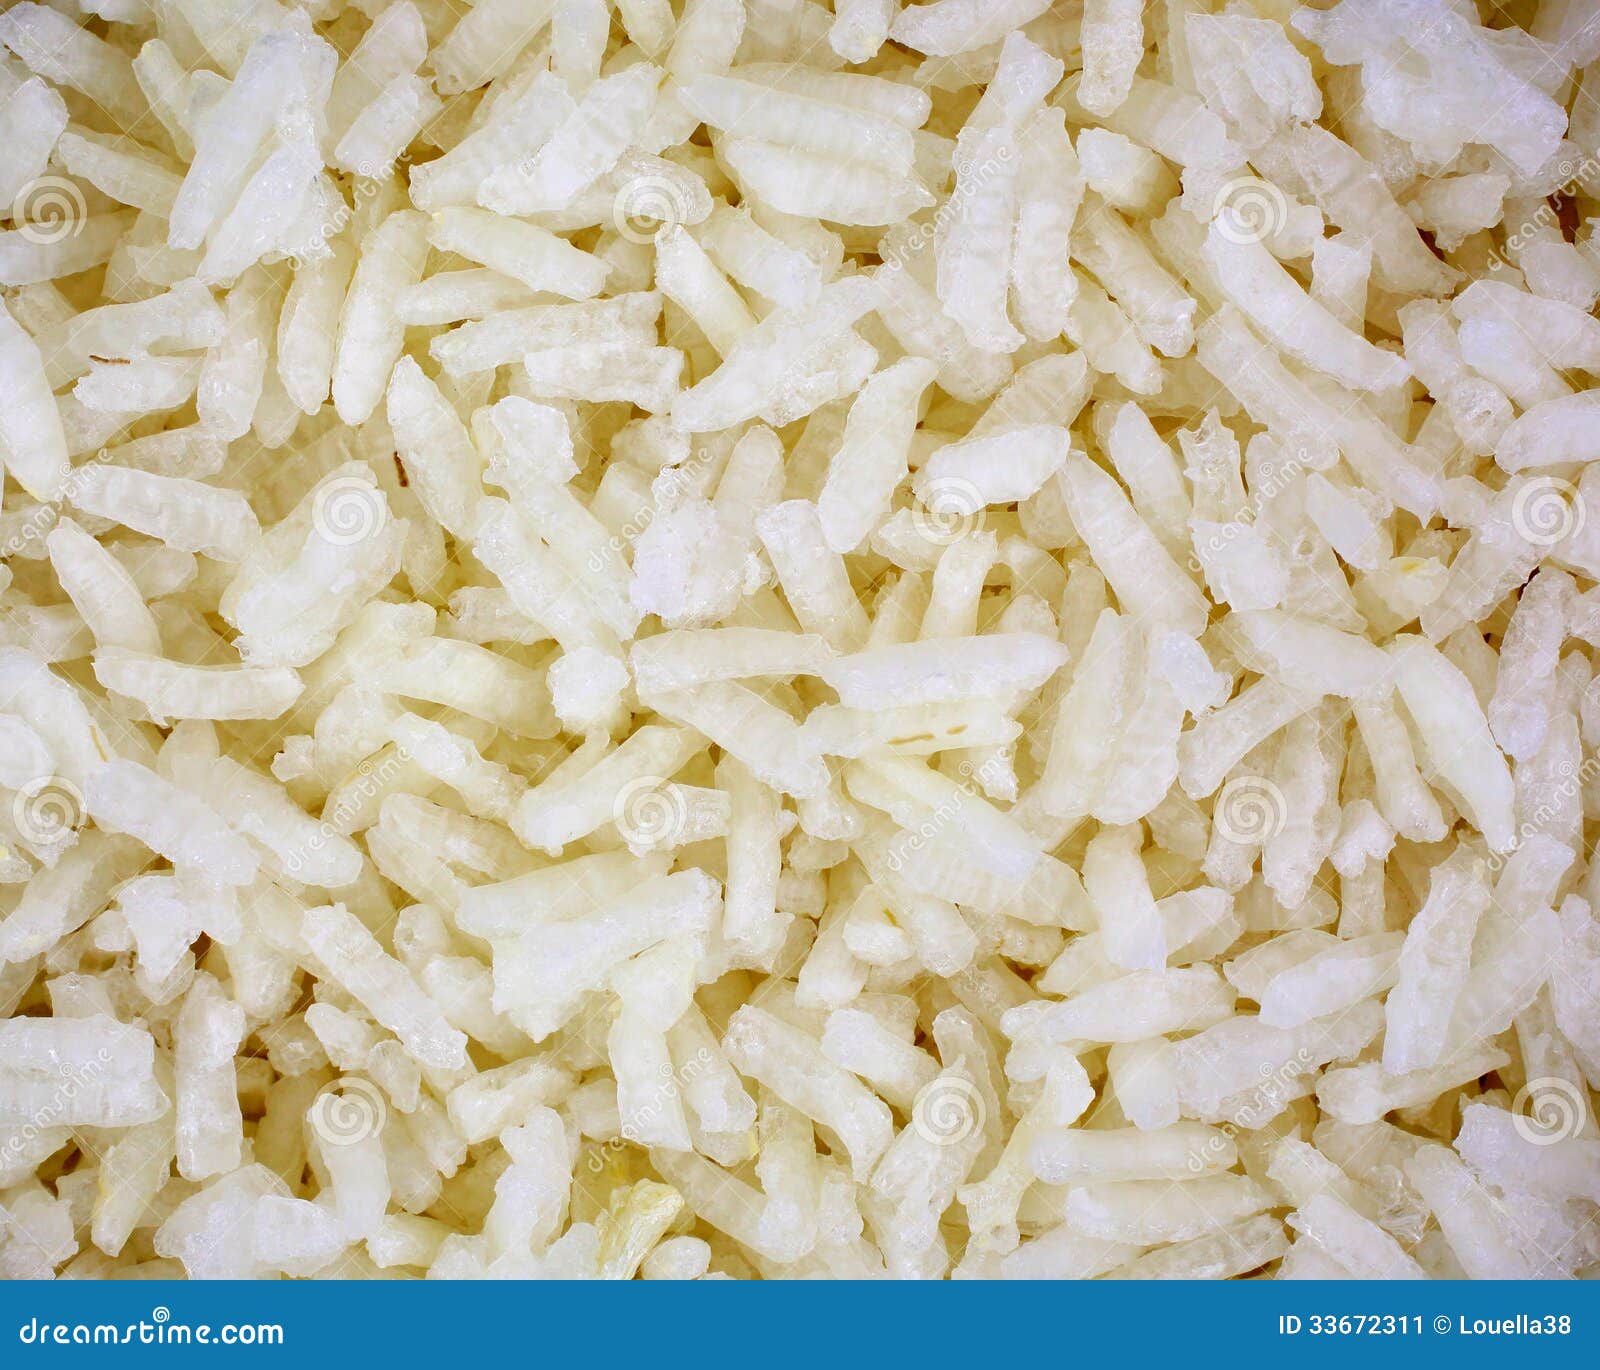 minute-rice-close-view-enriched-precooked-long-grain-33672311.jpg